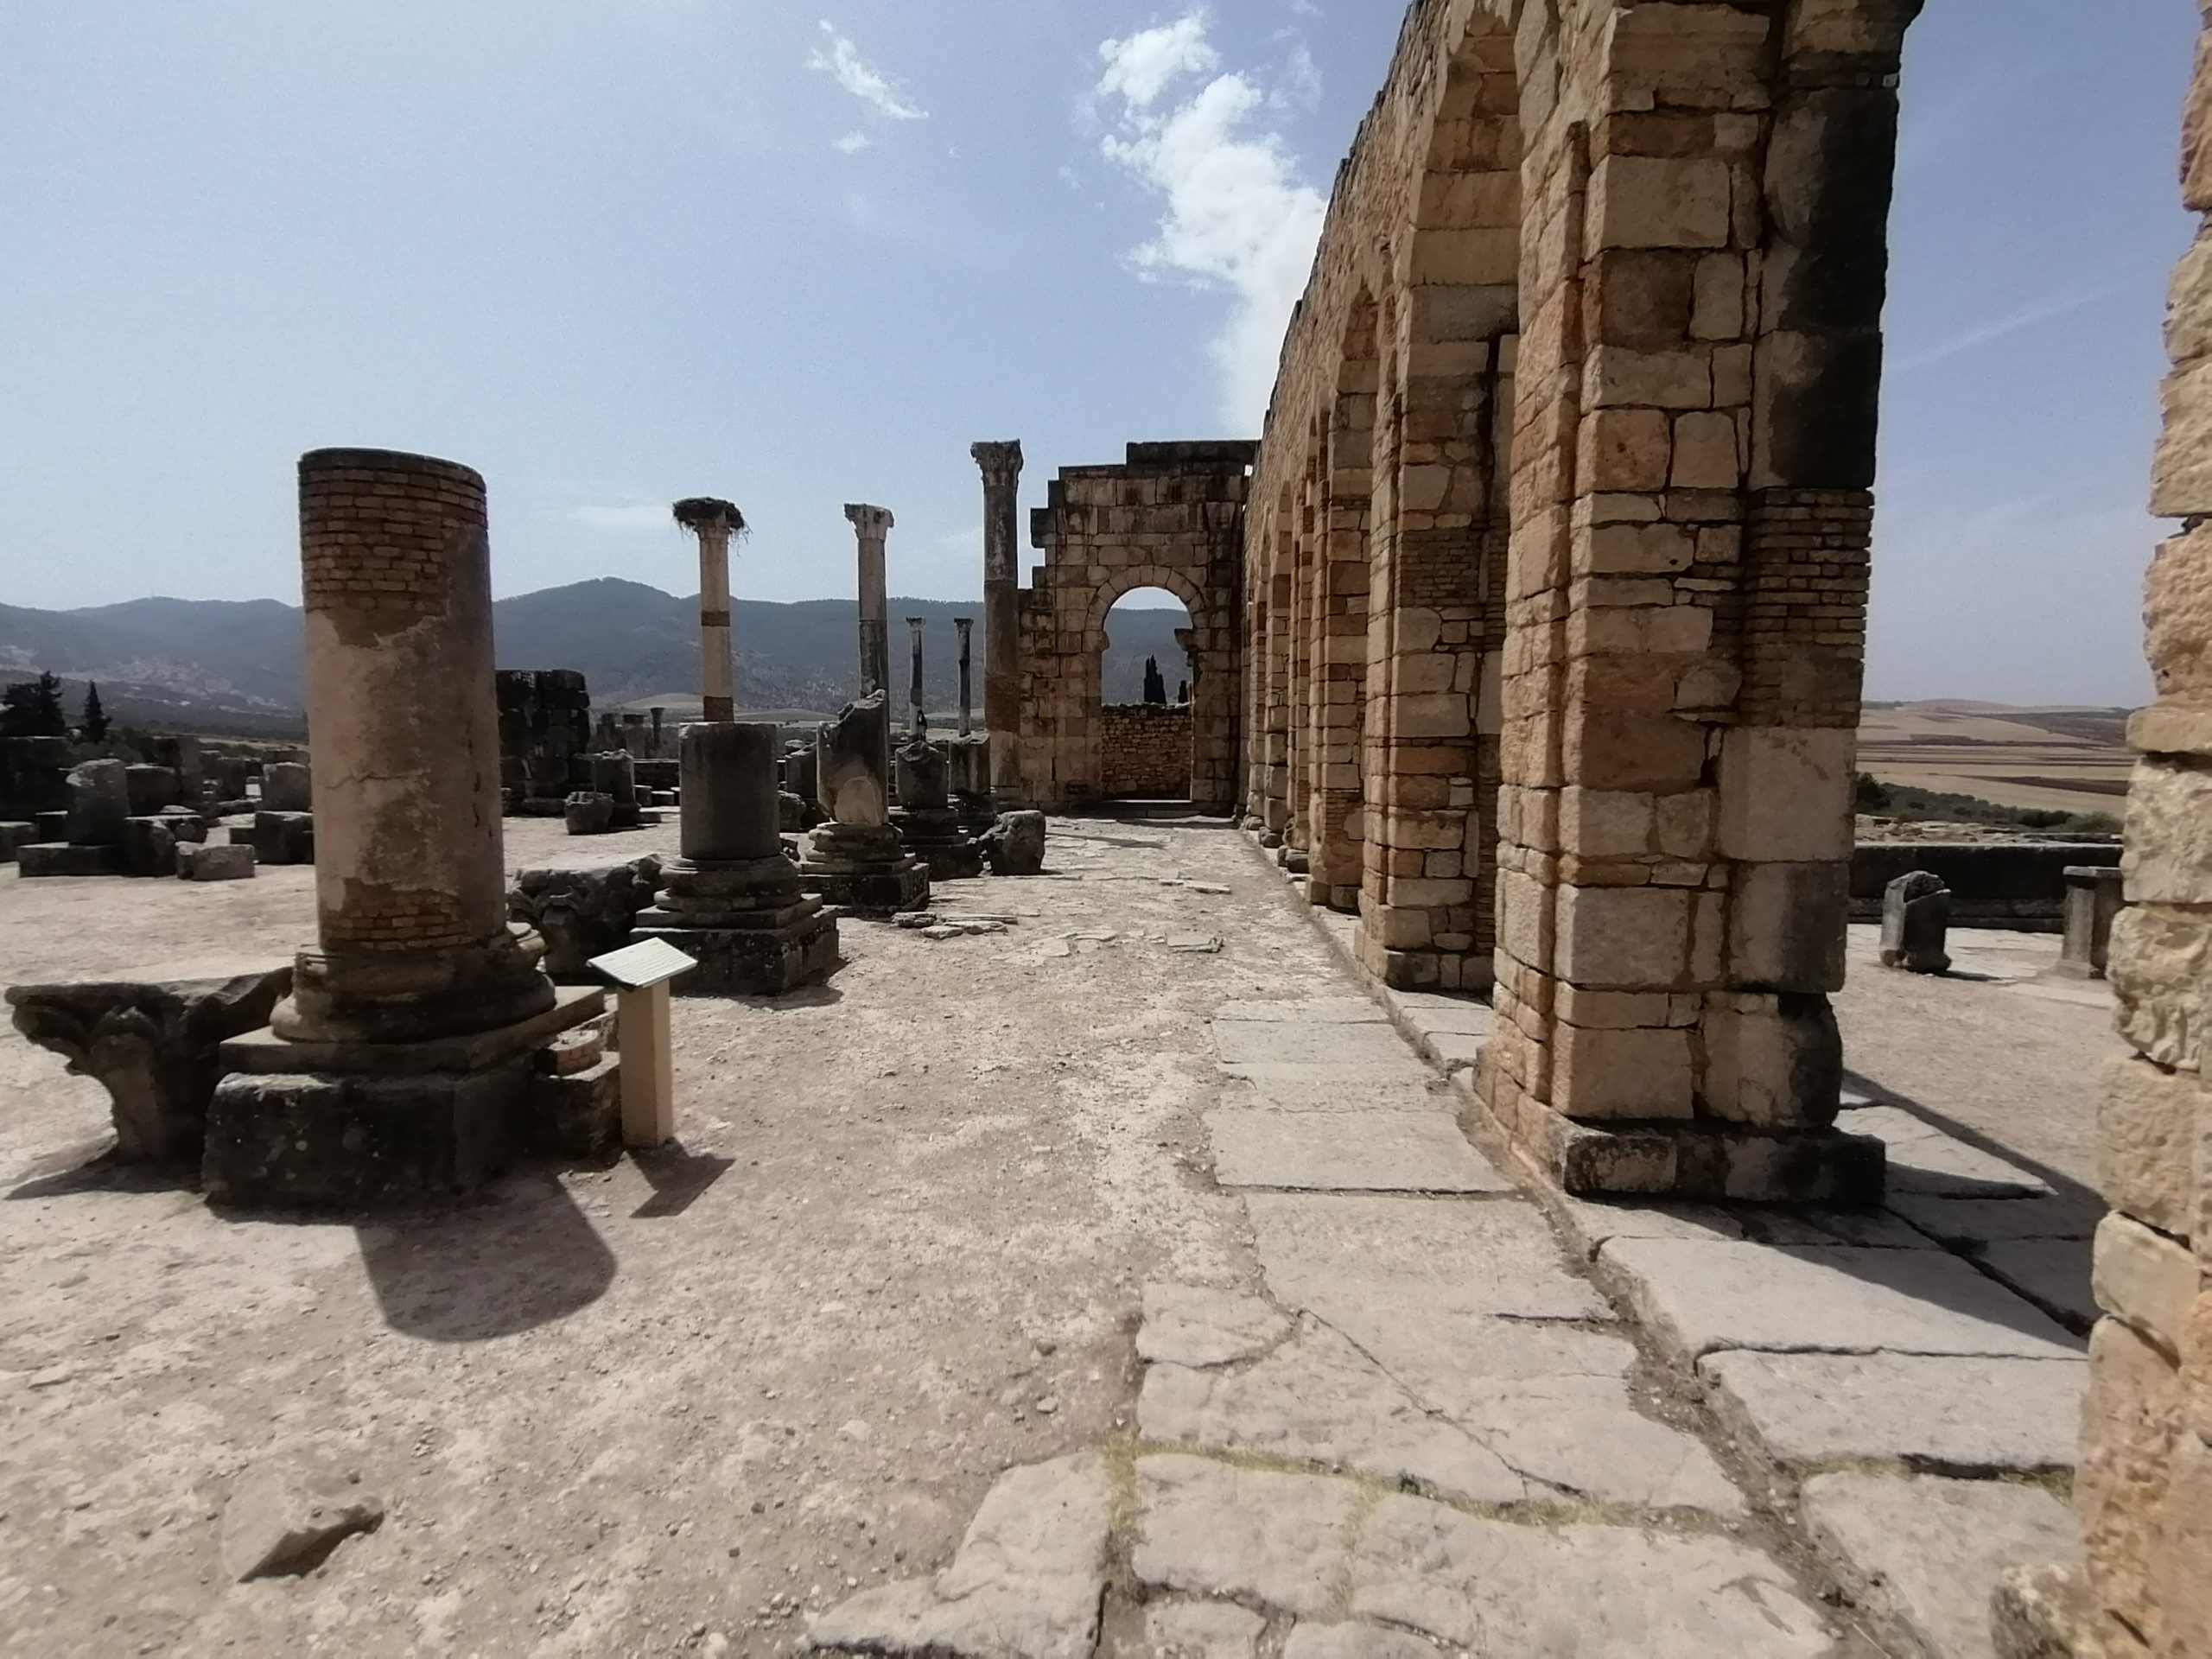 Impression of our visit to the Roman remains of the city of Volubilis in Morocco.